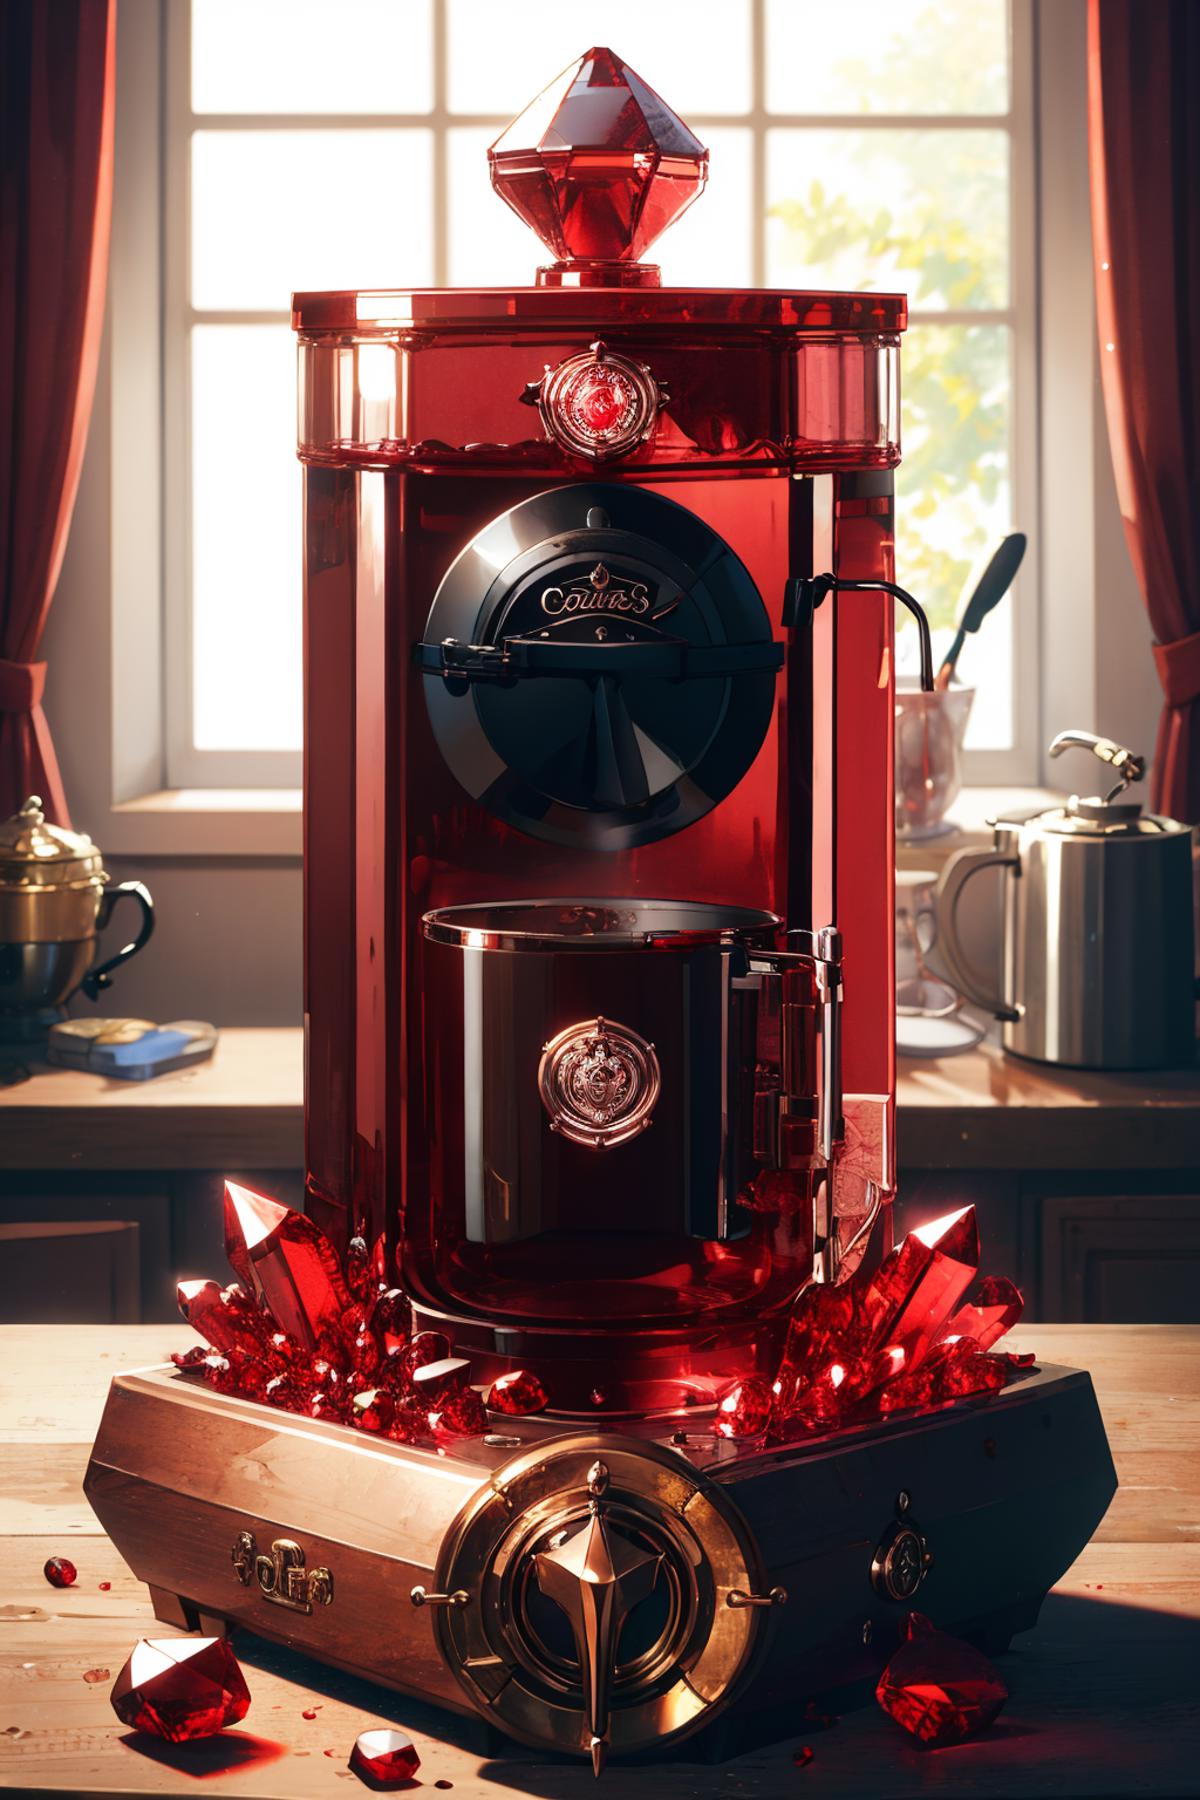 A red Caffitaly coffee machine with a red tray of crystals in front of it.